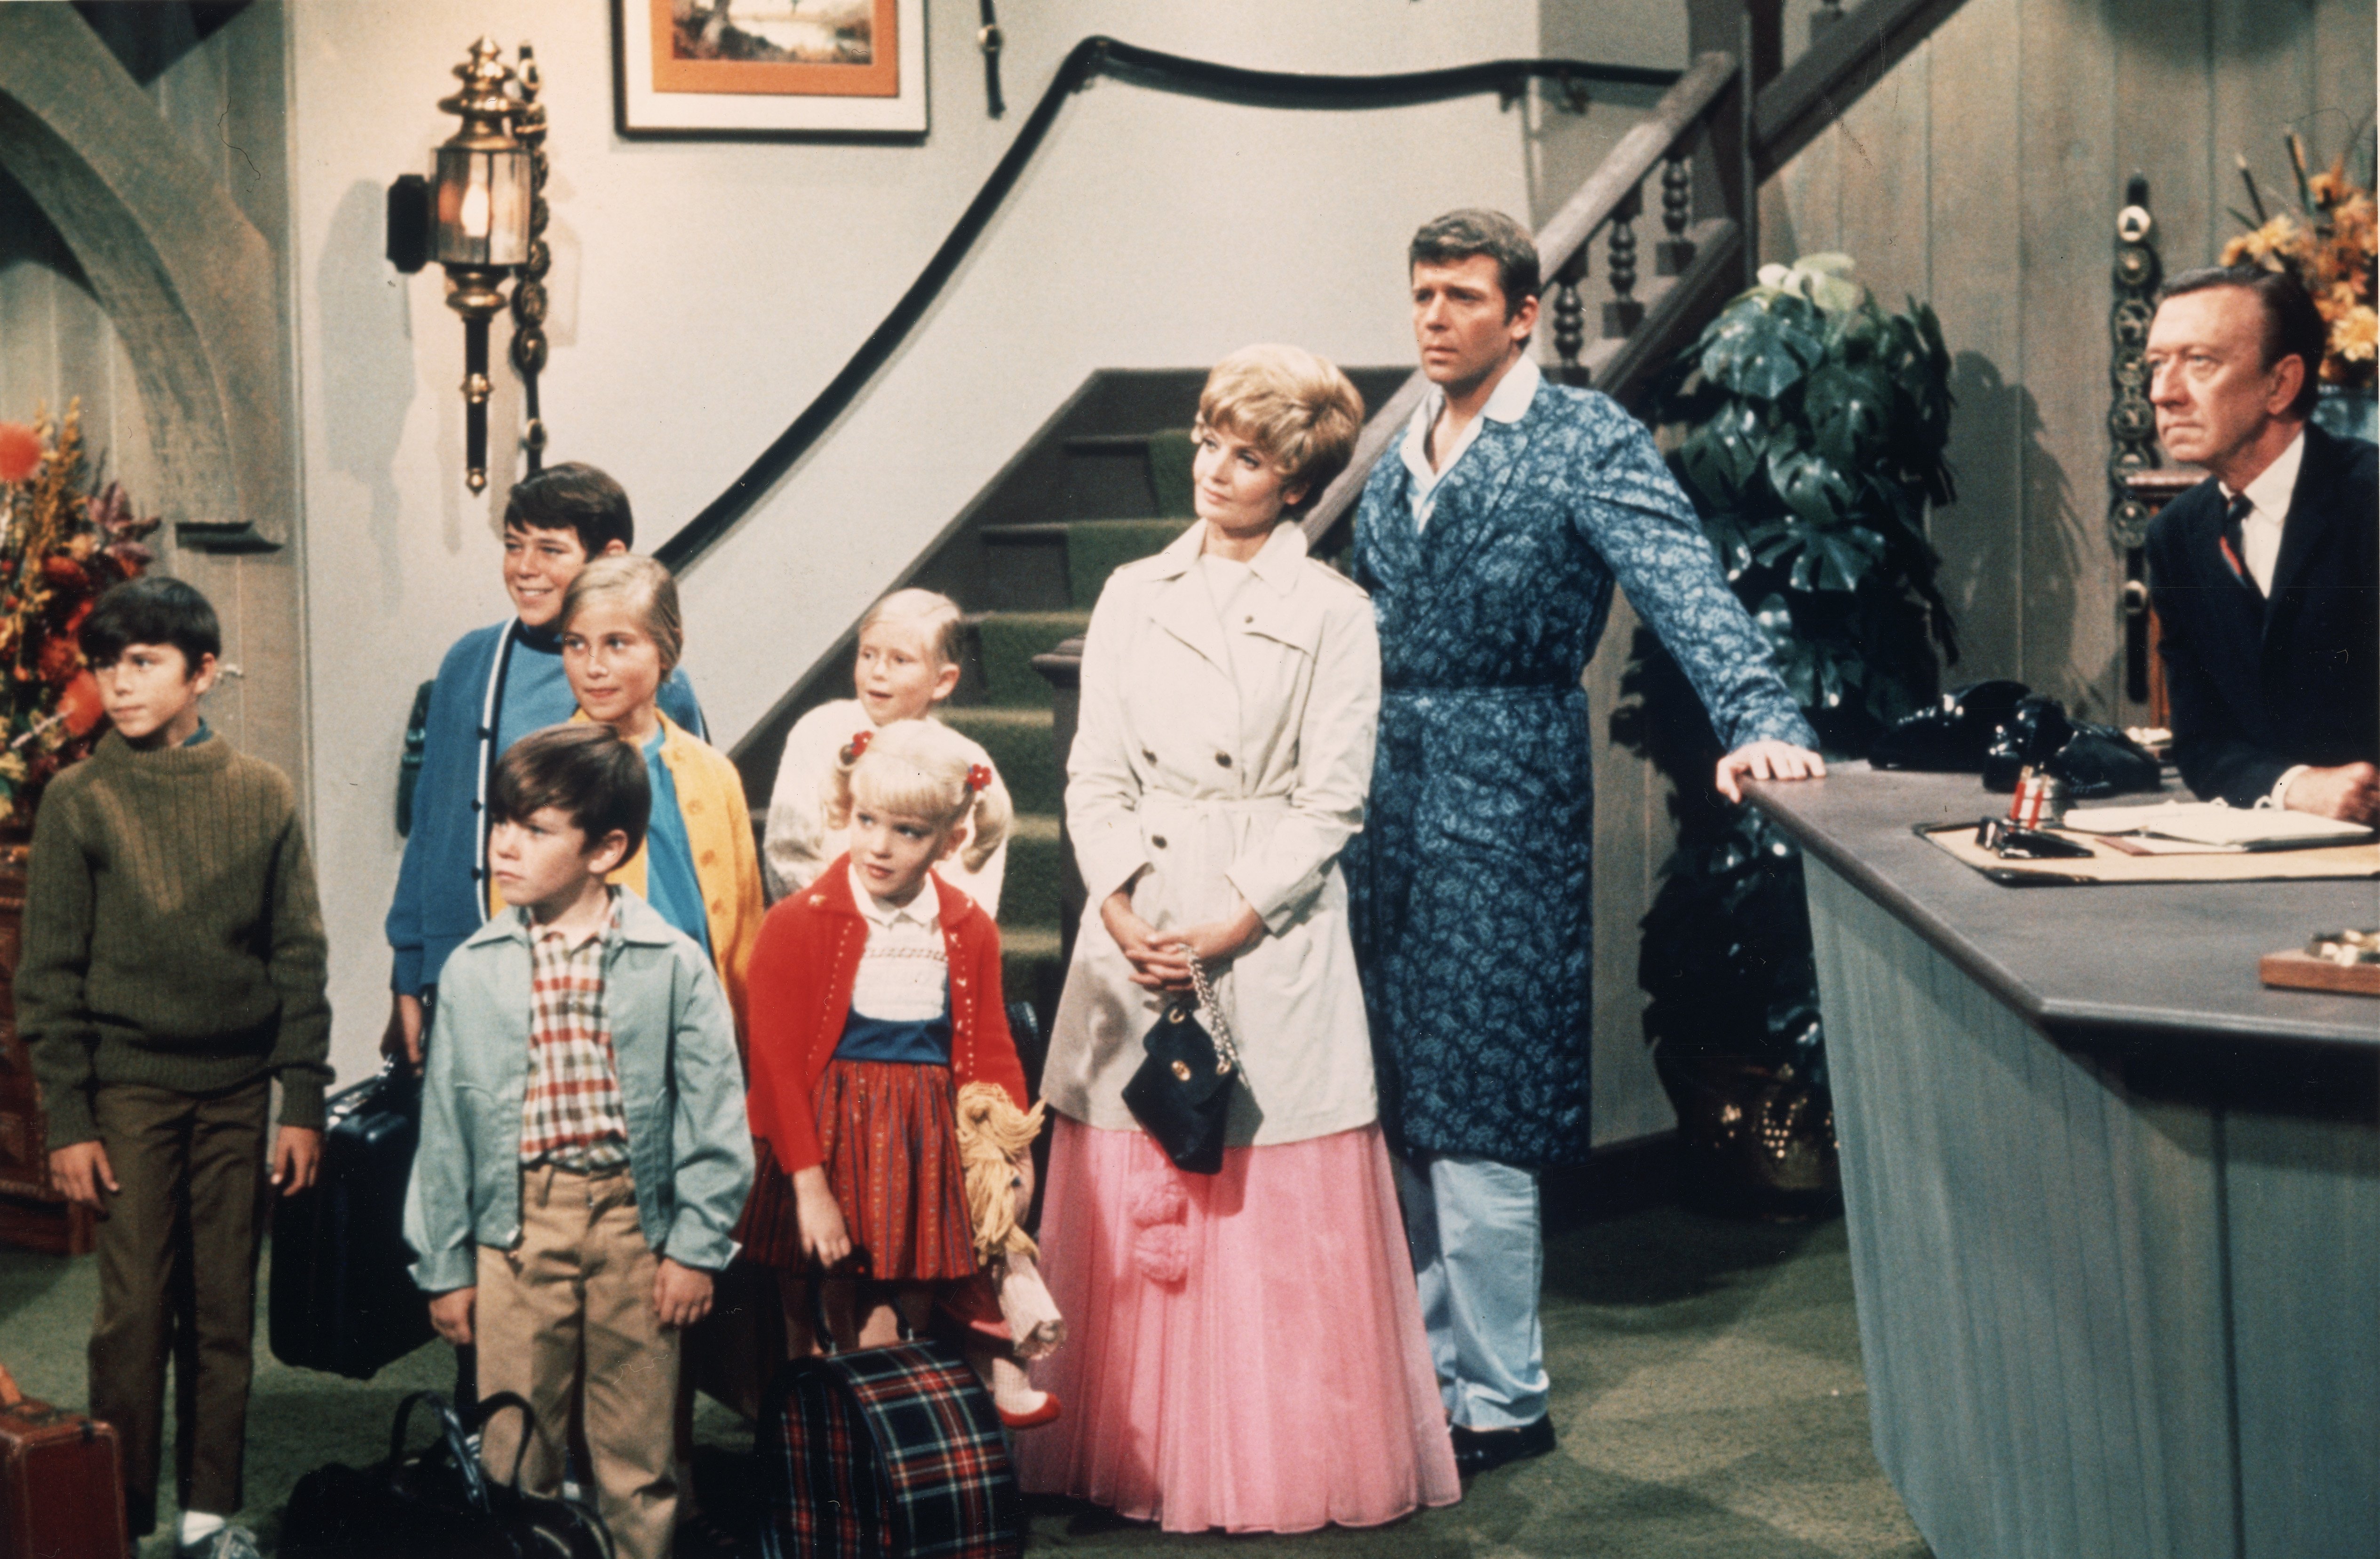 Robert Reed and Florence Henderson stand in a hotel lobby with the rest of the cast of 'The Brady Bunch' in 1969 | Source: Getty Images